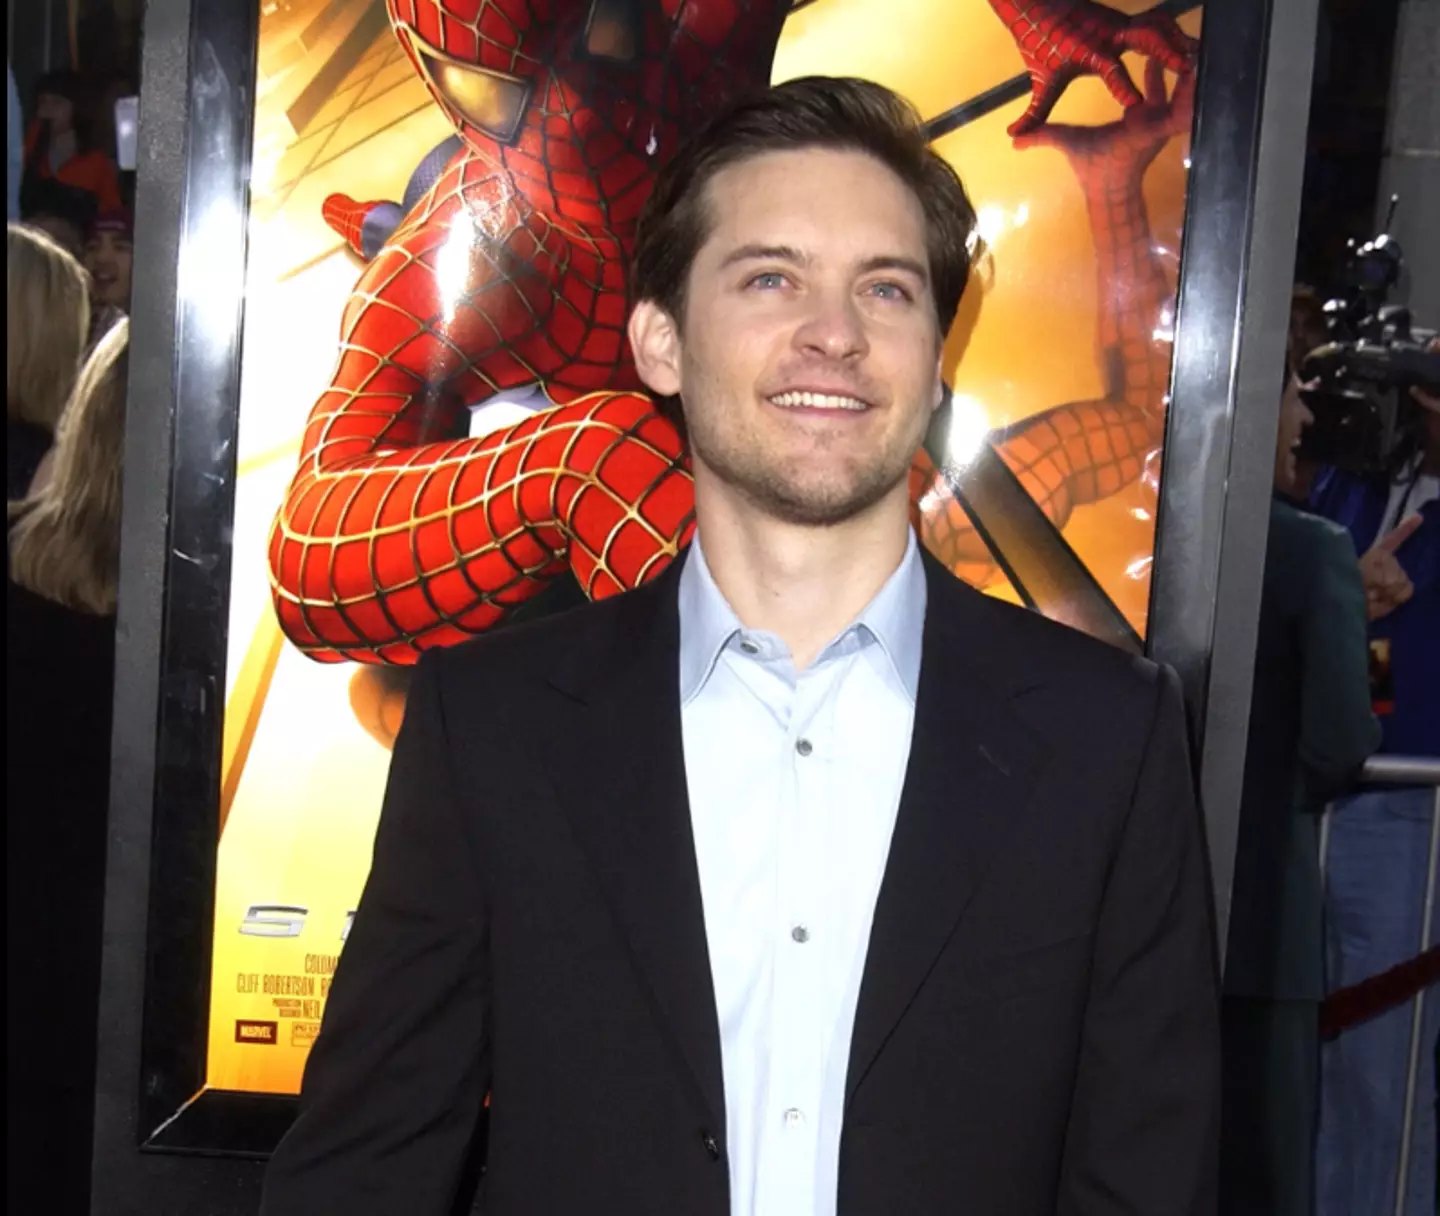 Tobey Maguire’s was the film series' Peter Parker.